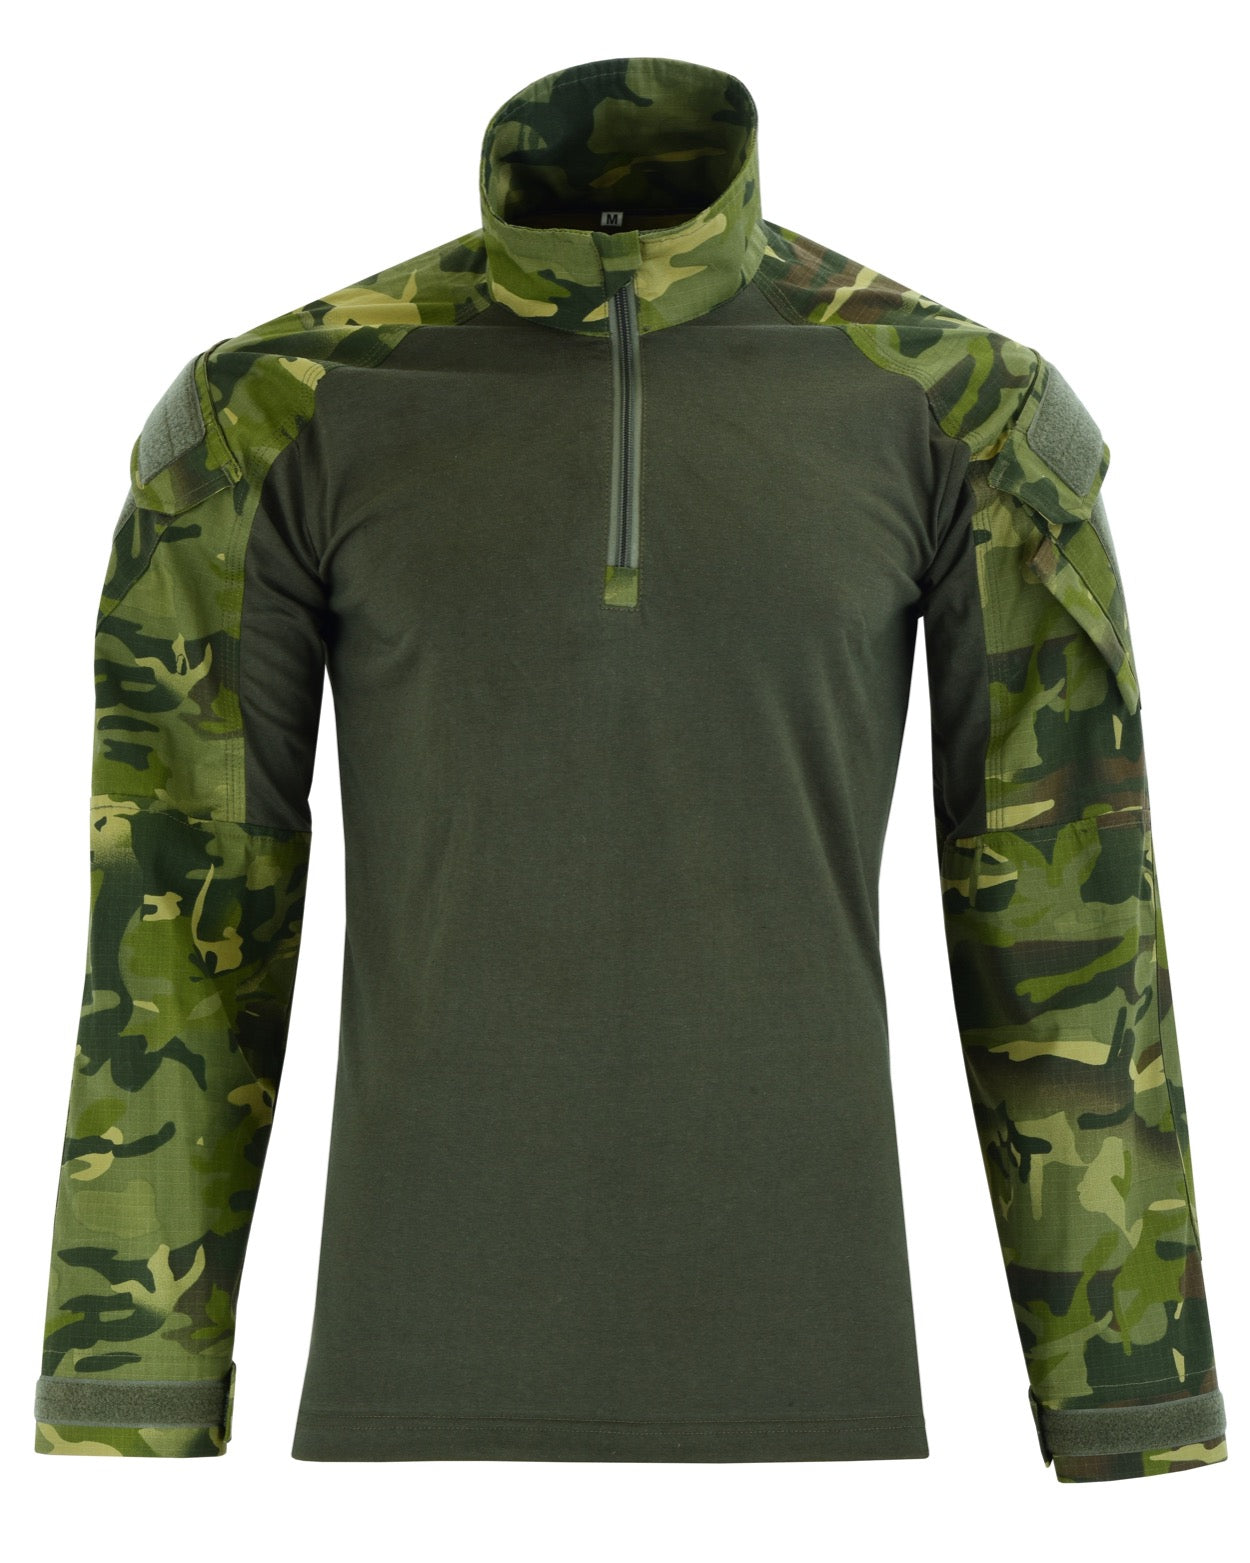 Tactical Zone HYBRID TACTICAL SHIRT IS A PERFECT COMBAT SHIRT Colour  UTP-Temperate